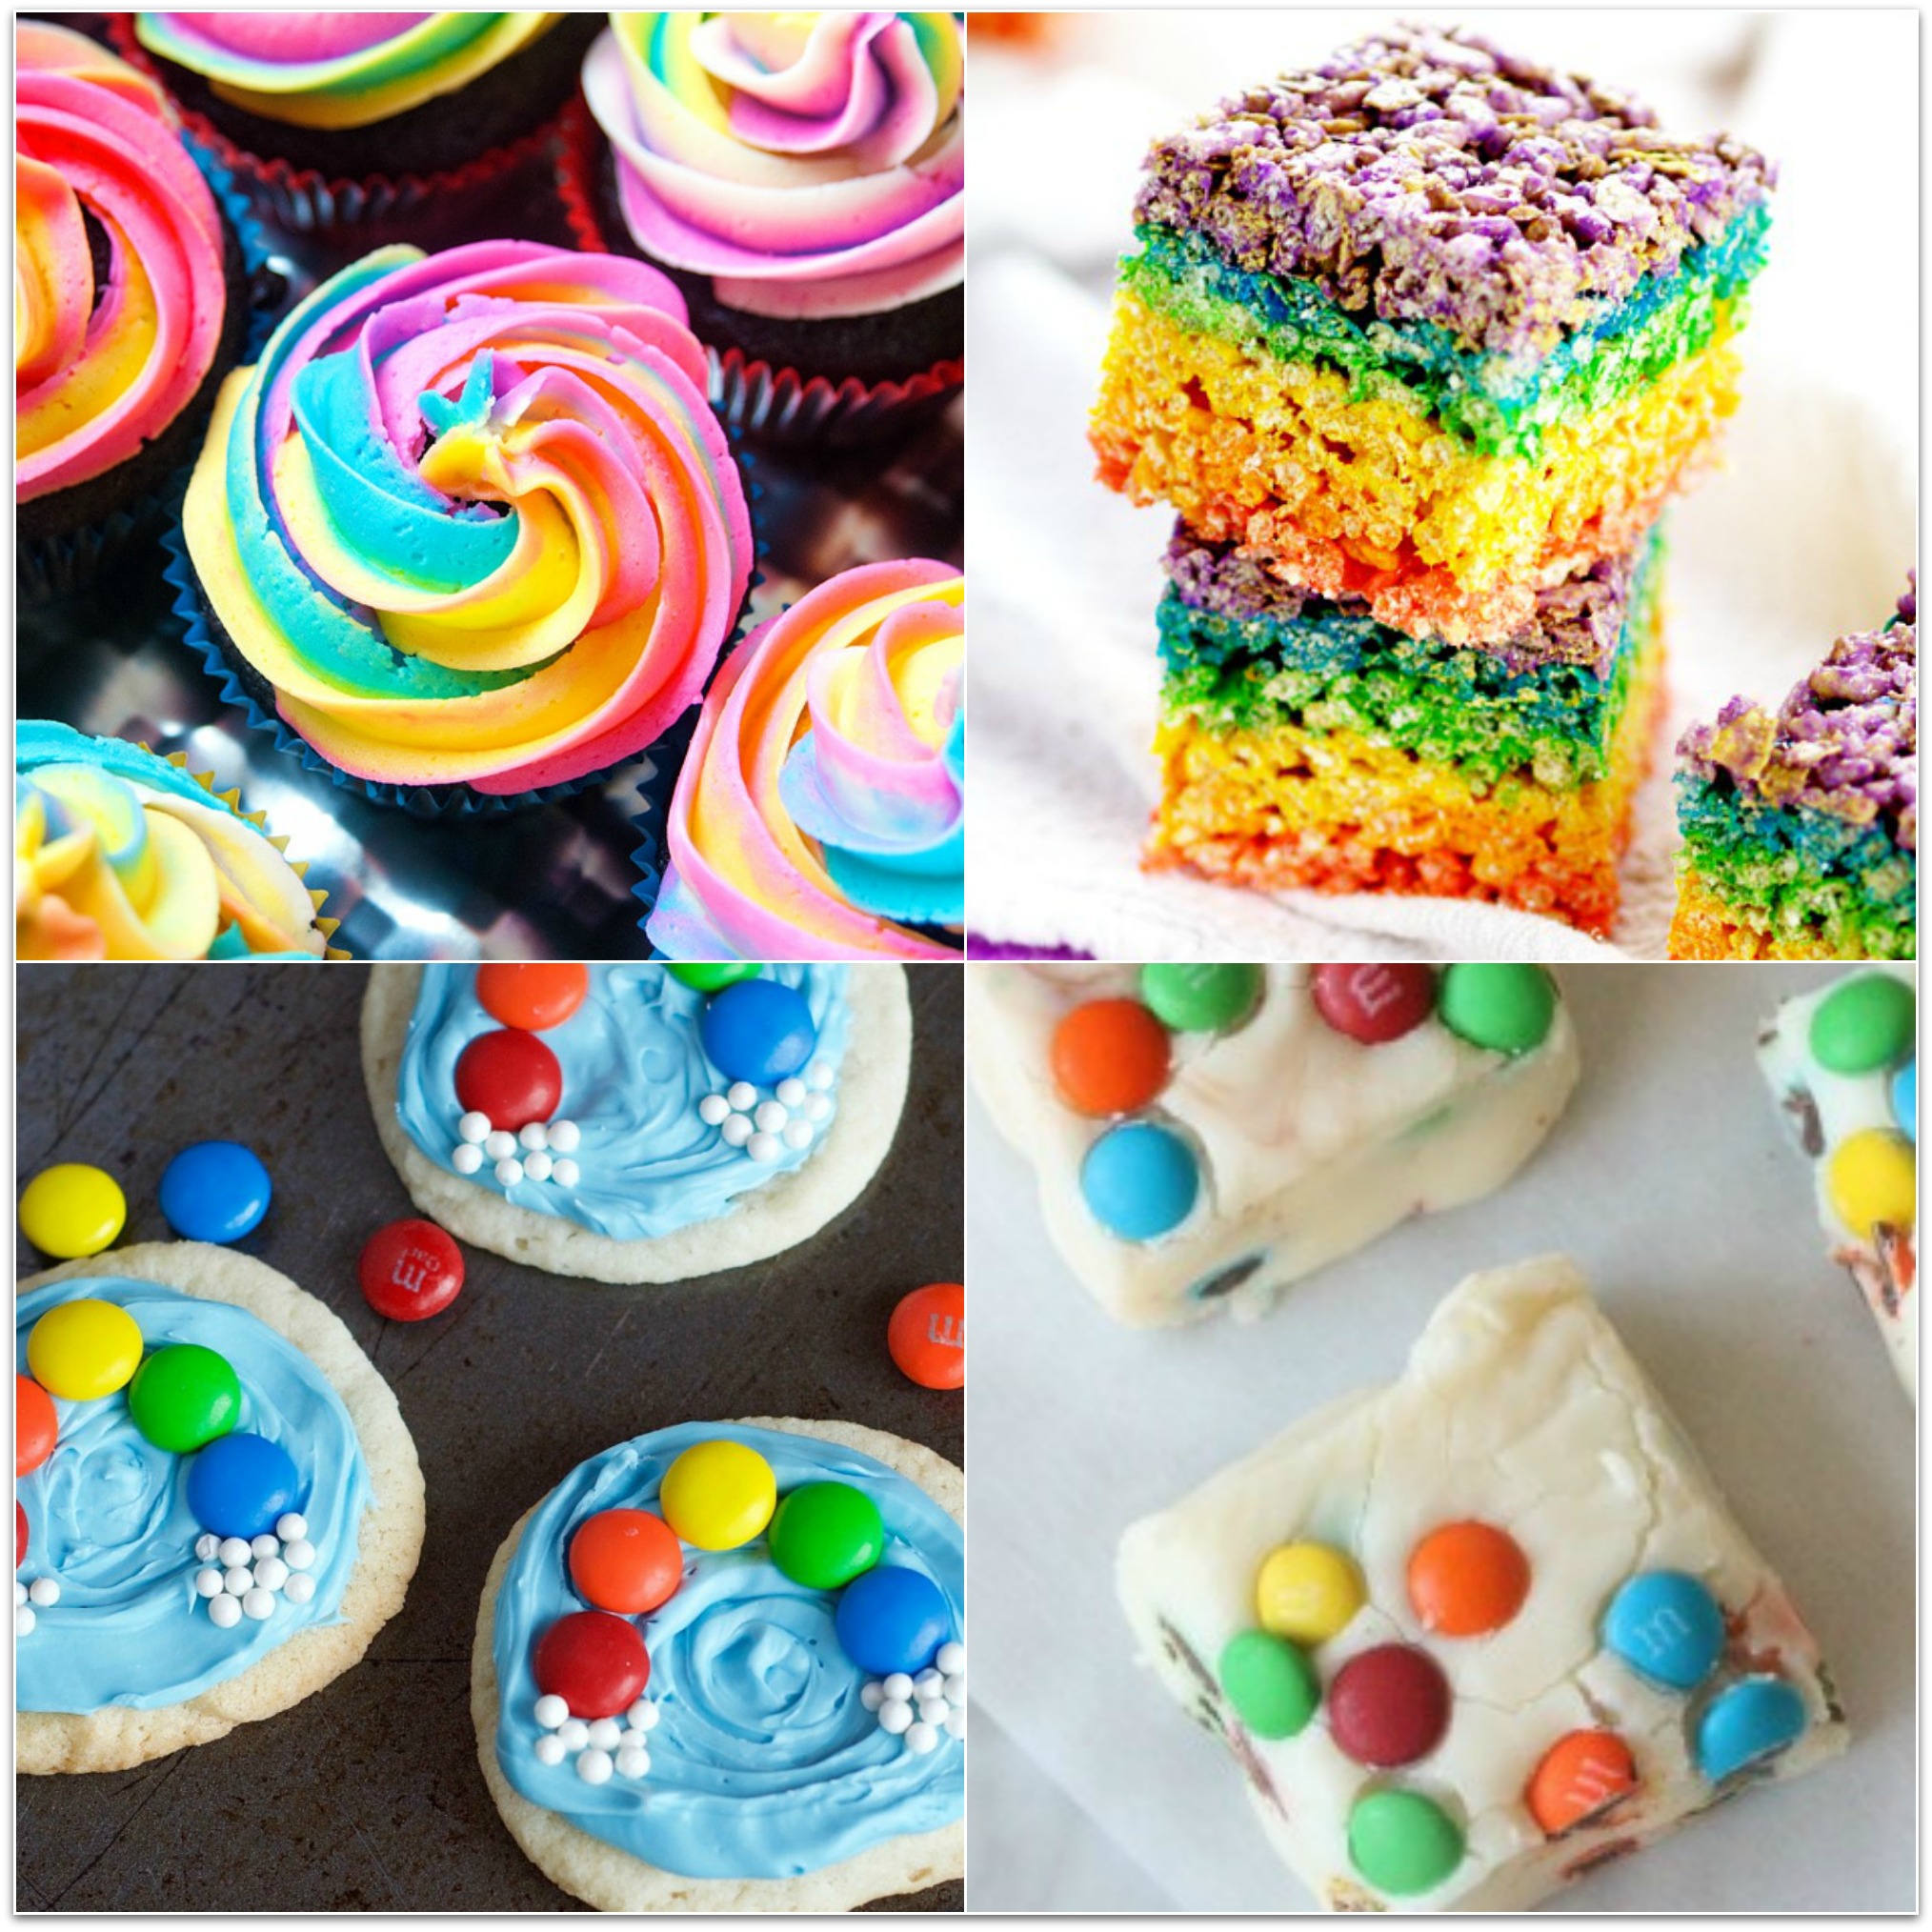 Colorful rainbow party food ideas and rainbow food recipes! Perfect for a rainbow birthday party or holiday gatherings!